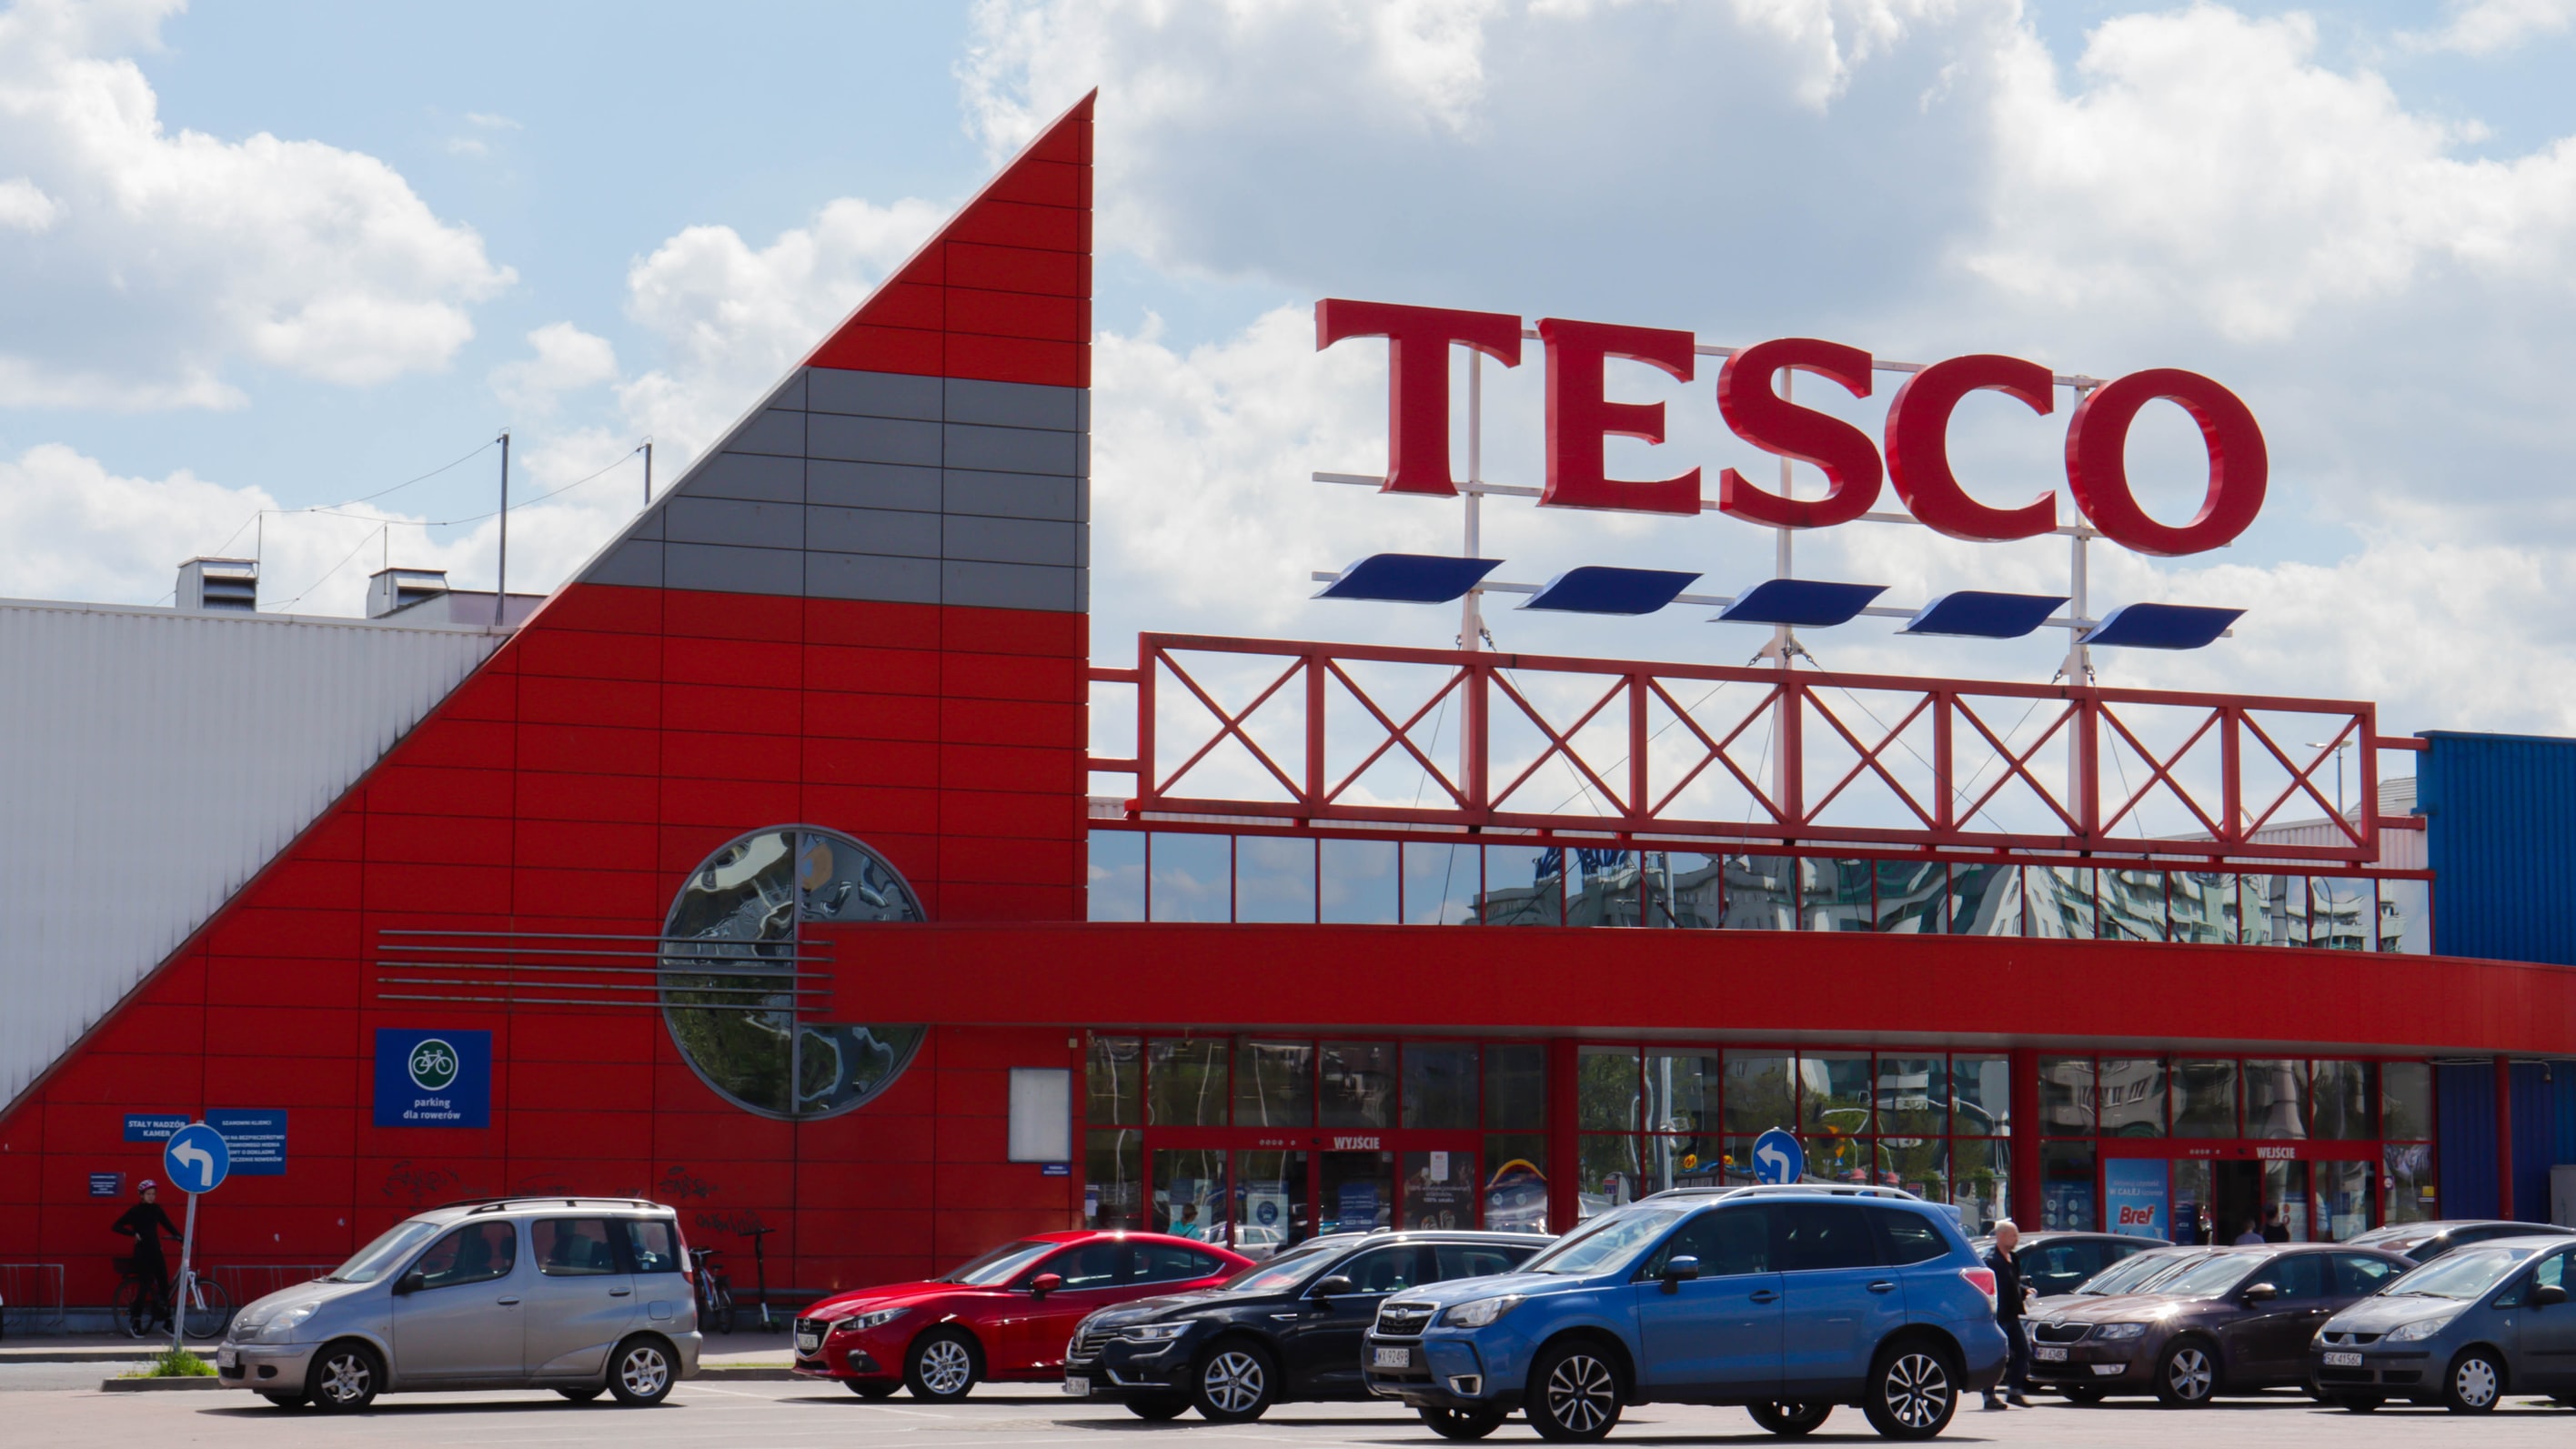 Tesco announce proposed final dividend of 7.70 pence per share